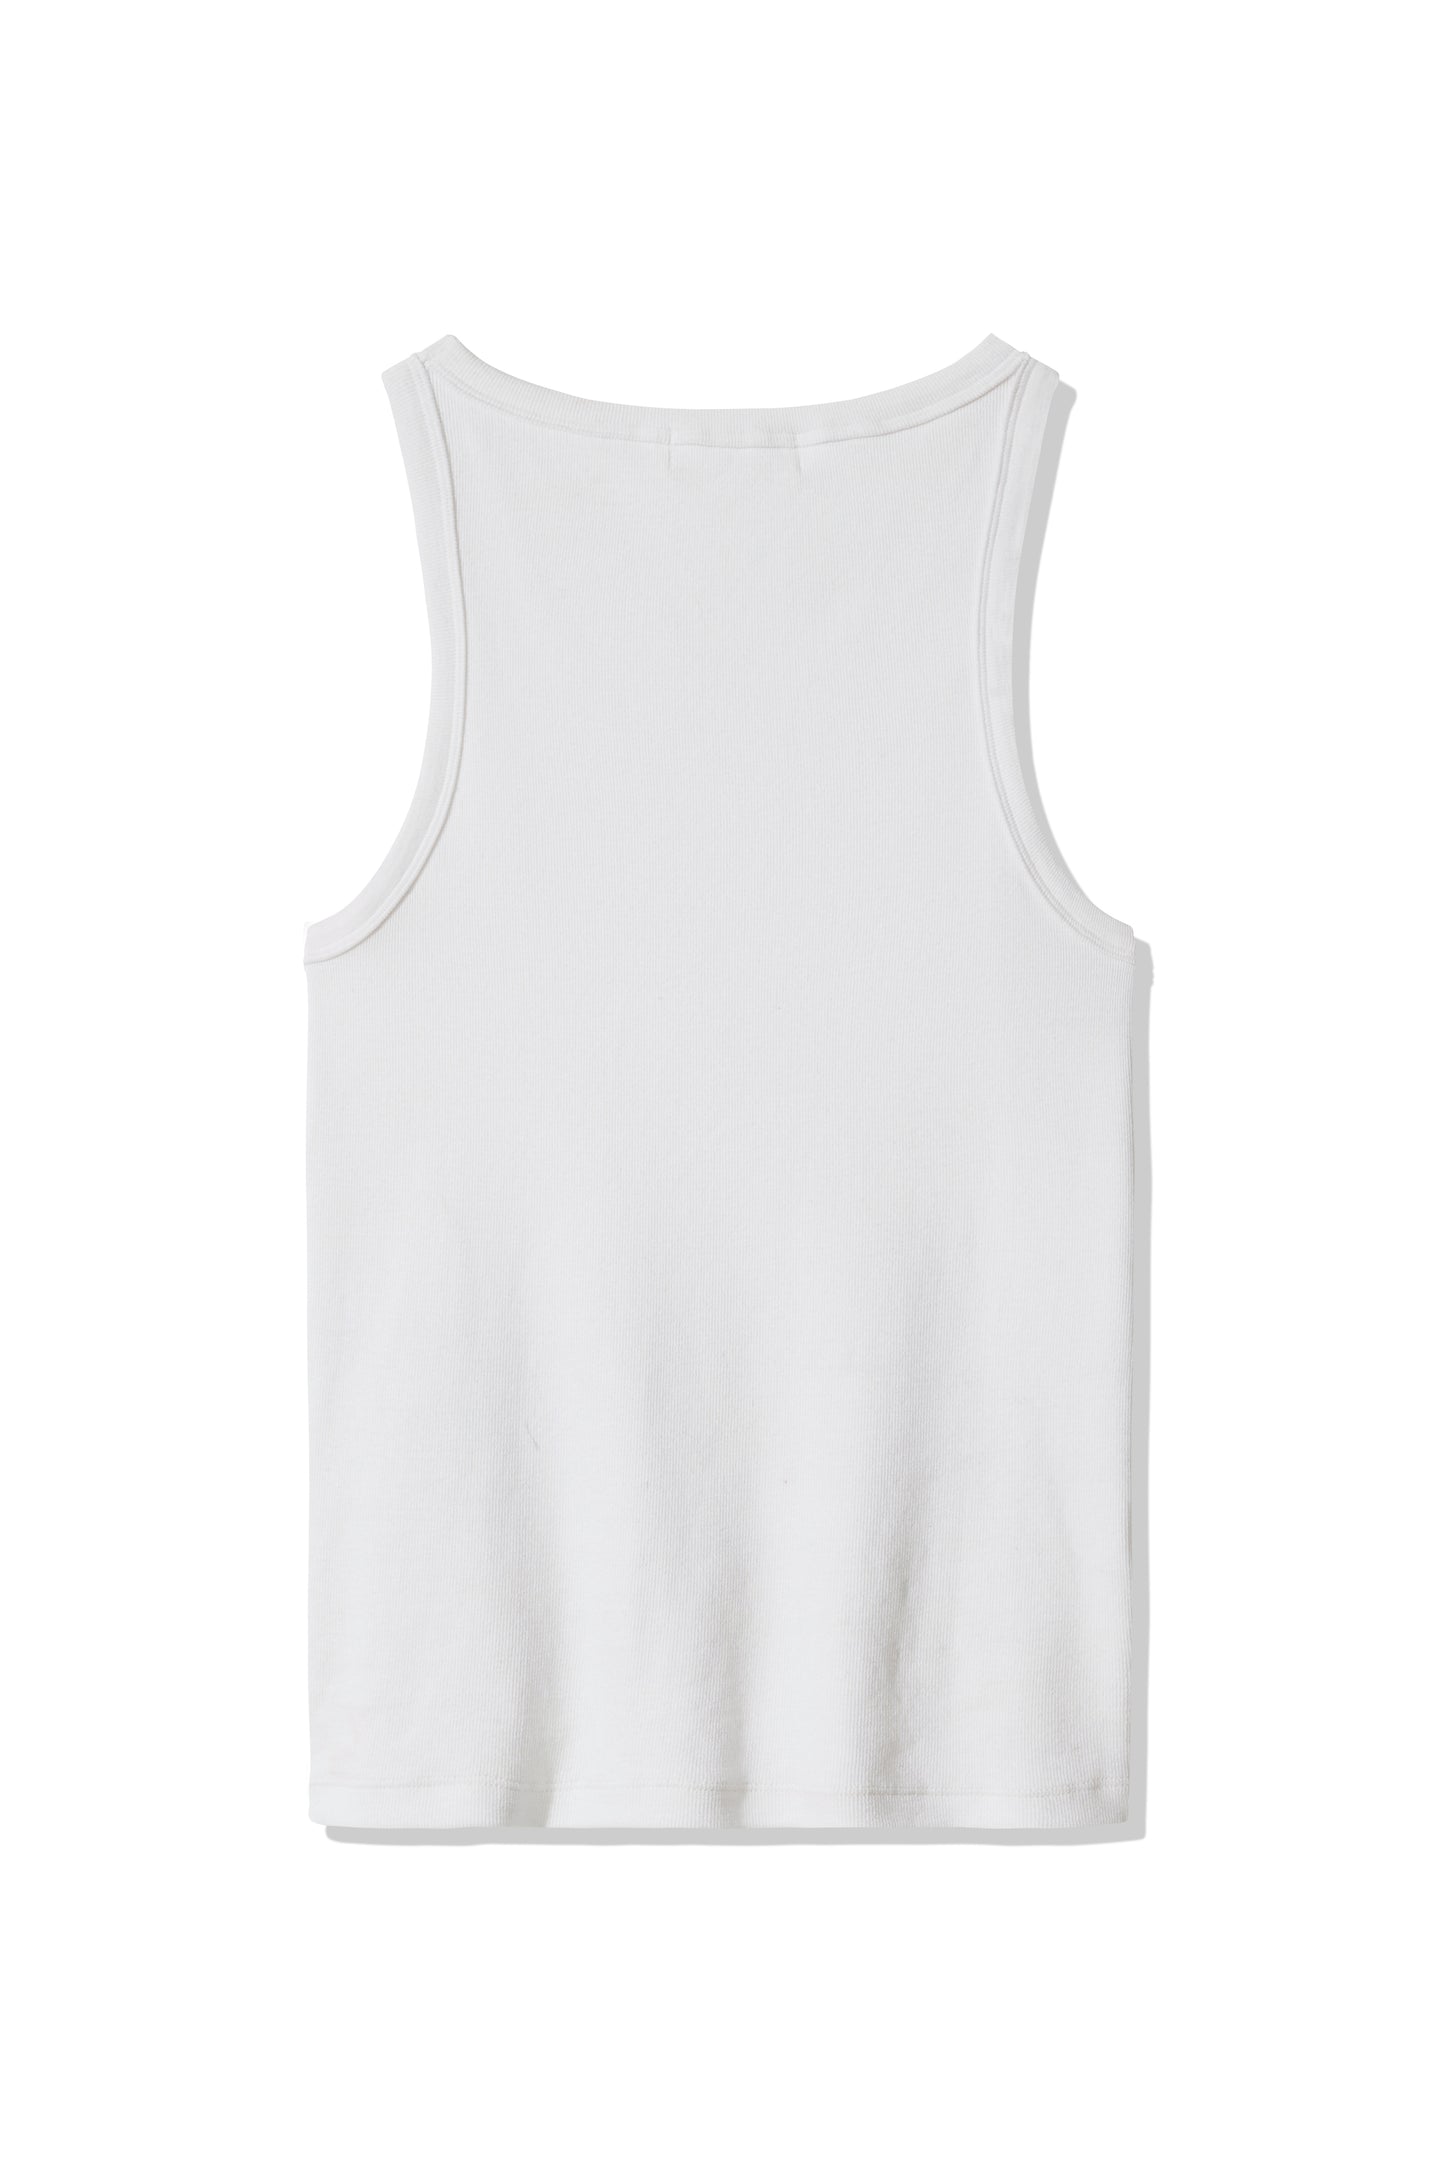 SIR the label Classic Tank WHITE